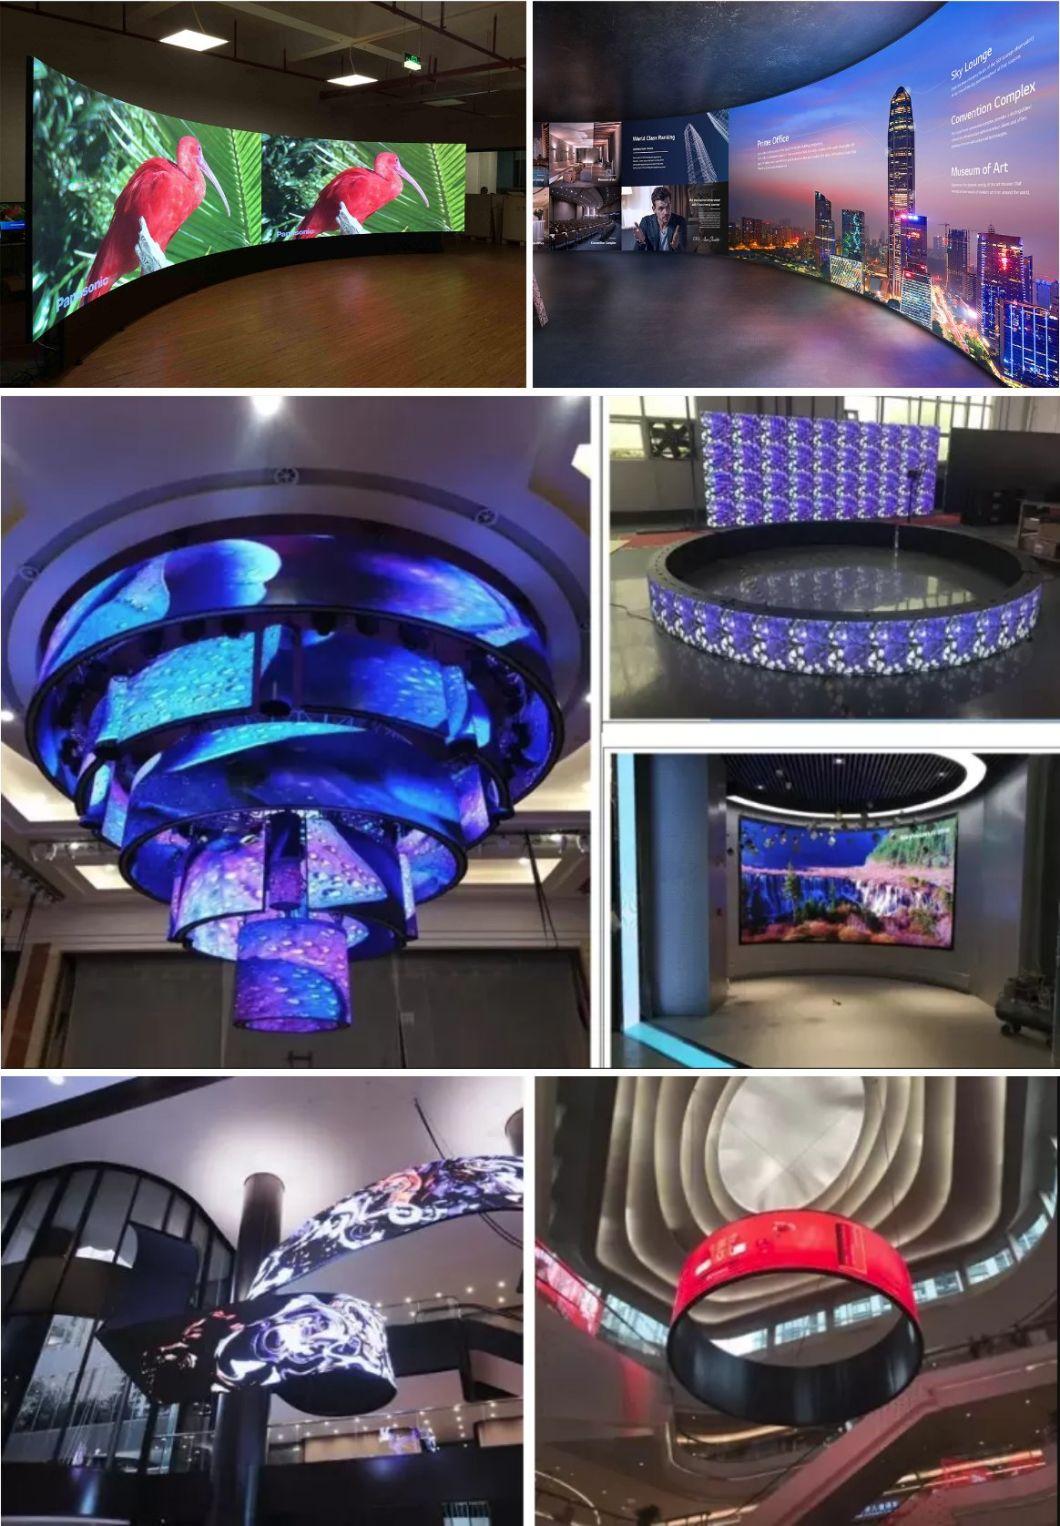 Indoor P3 Curved Soft Flexible LED Video Wall Display Screen for Exhibition Shop Store Cylindrical Column Use